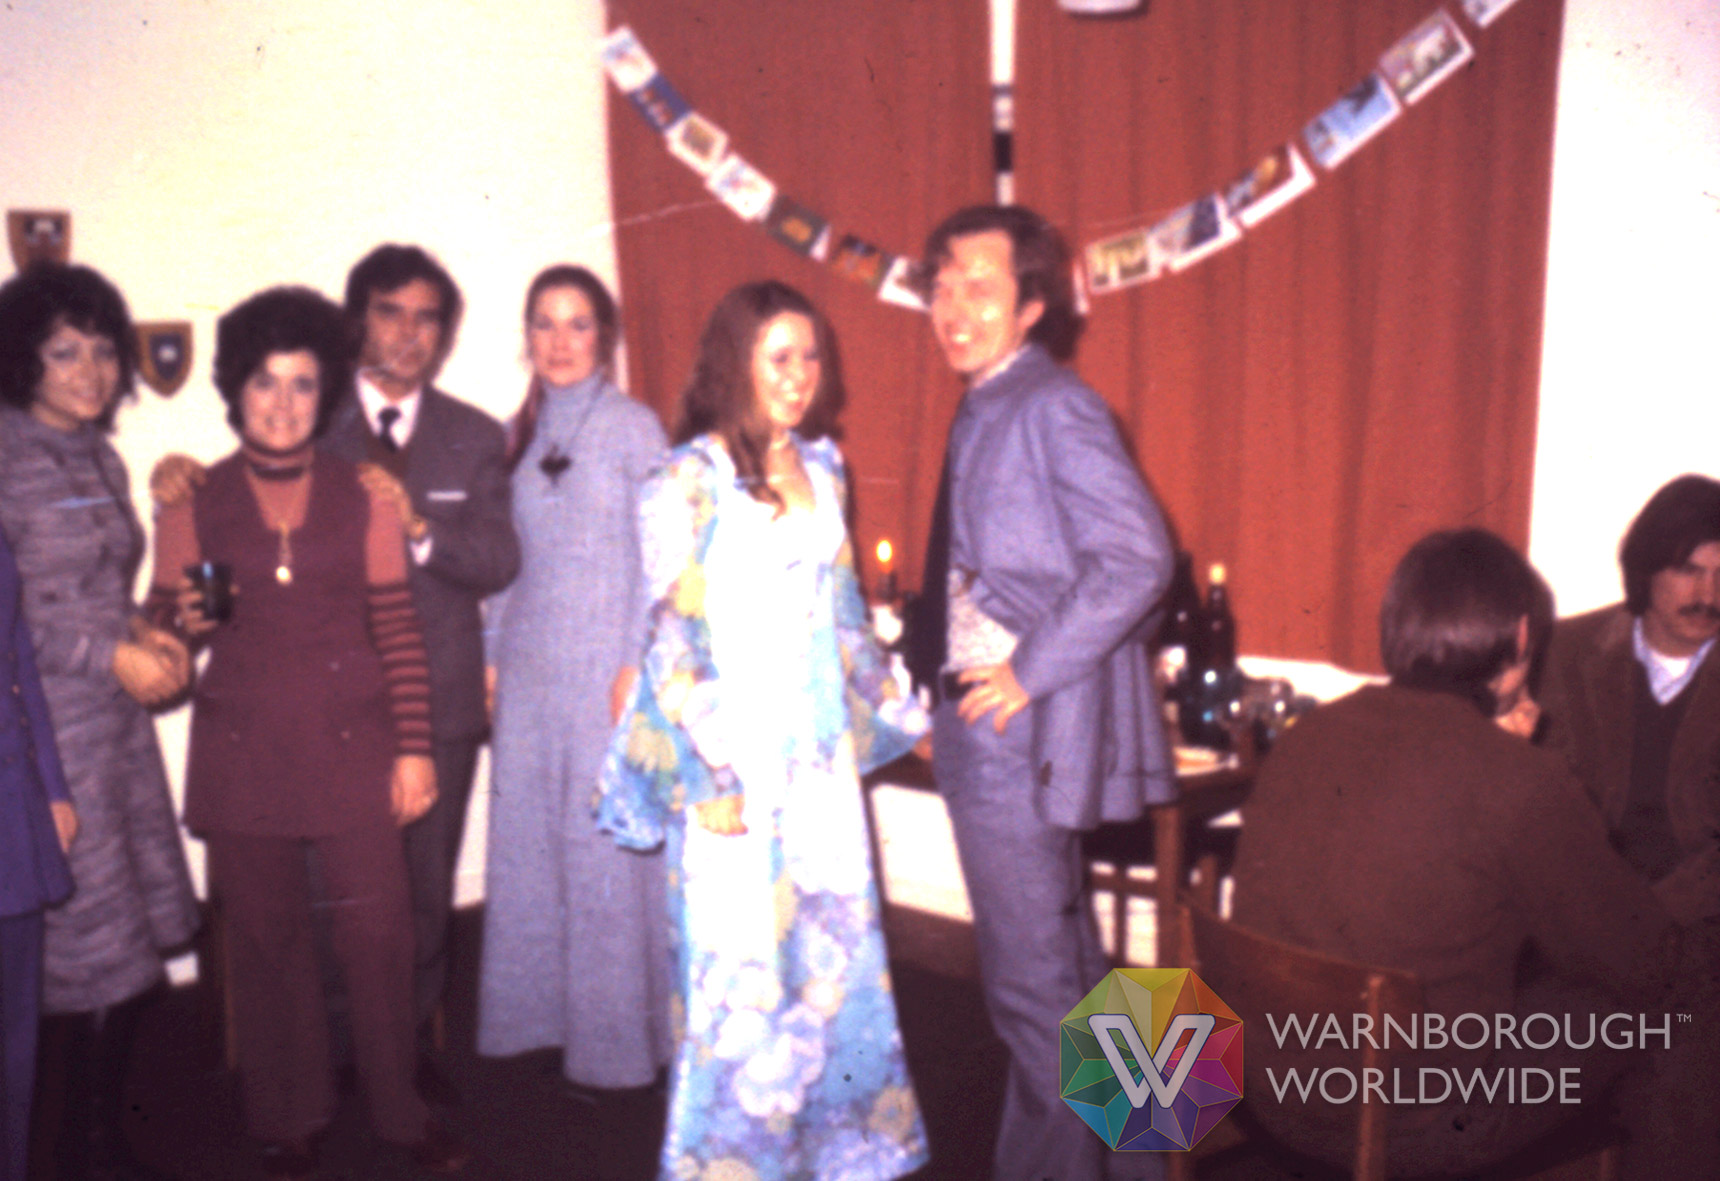 1973: Welcome Party at 19 Warnborough Road